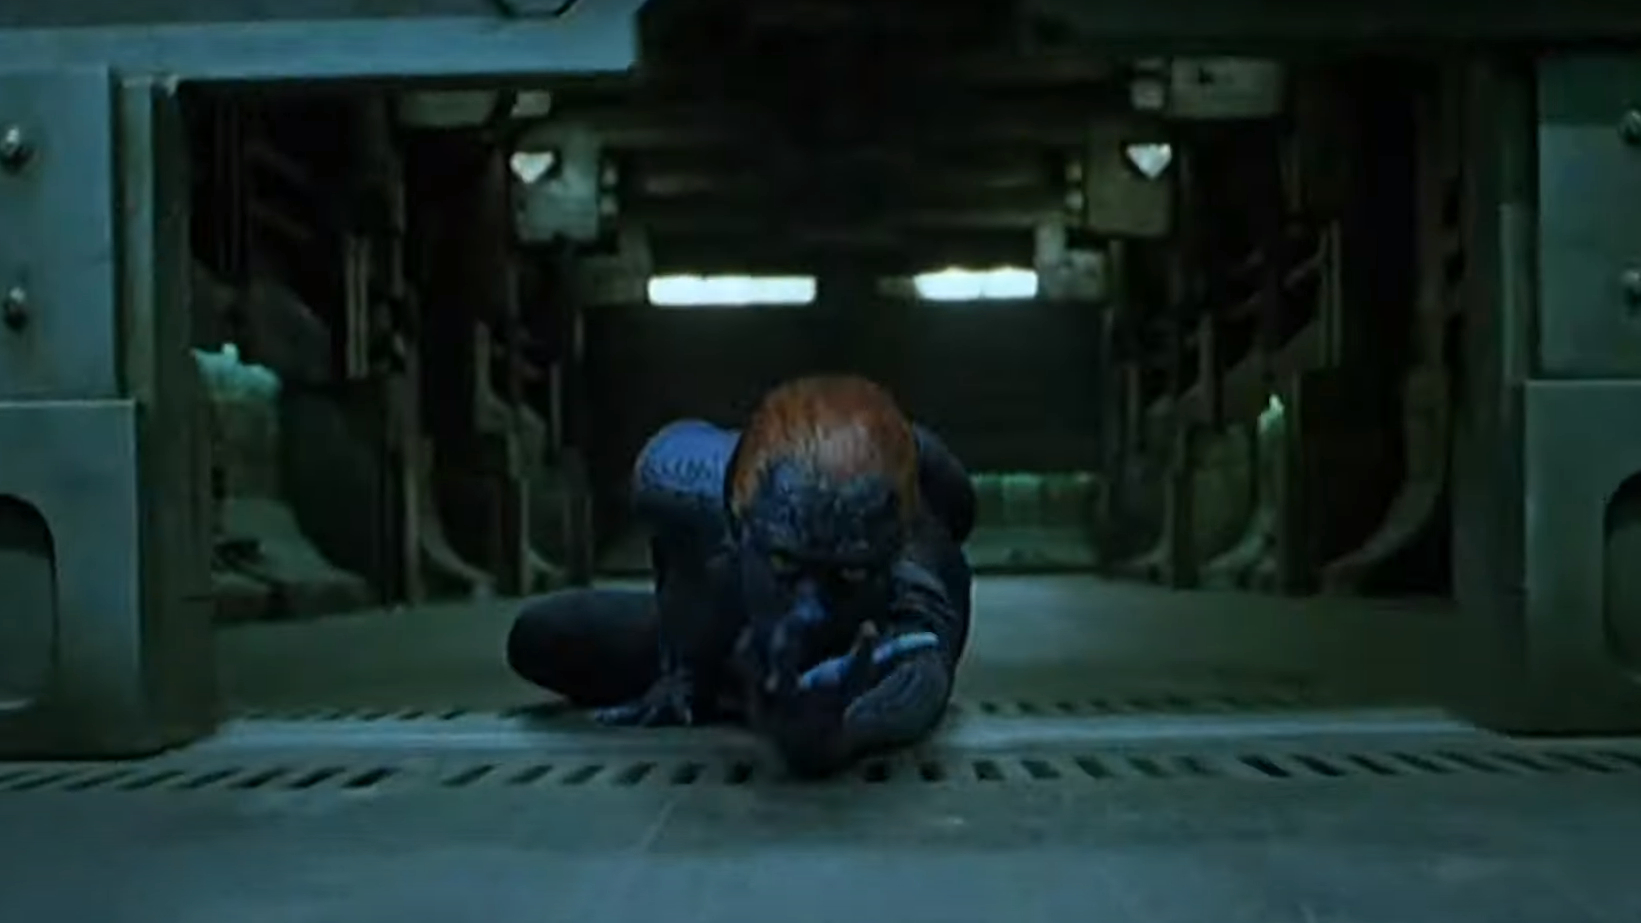 Mystique in human form, crouched, in a dimly lit industrial space